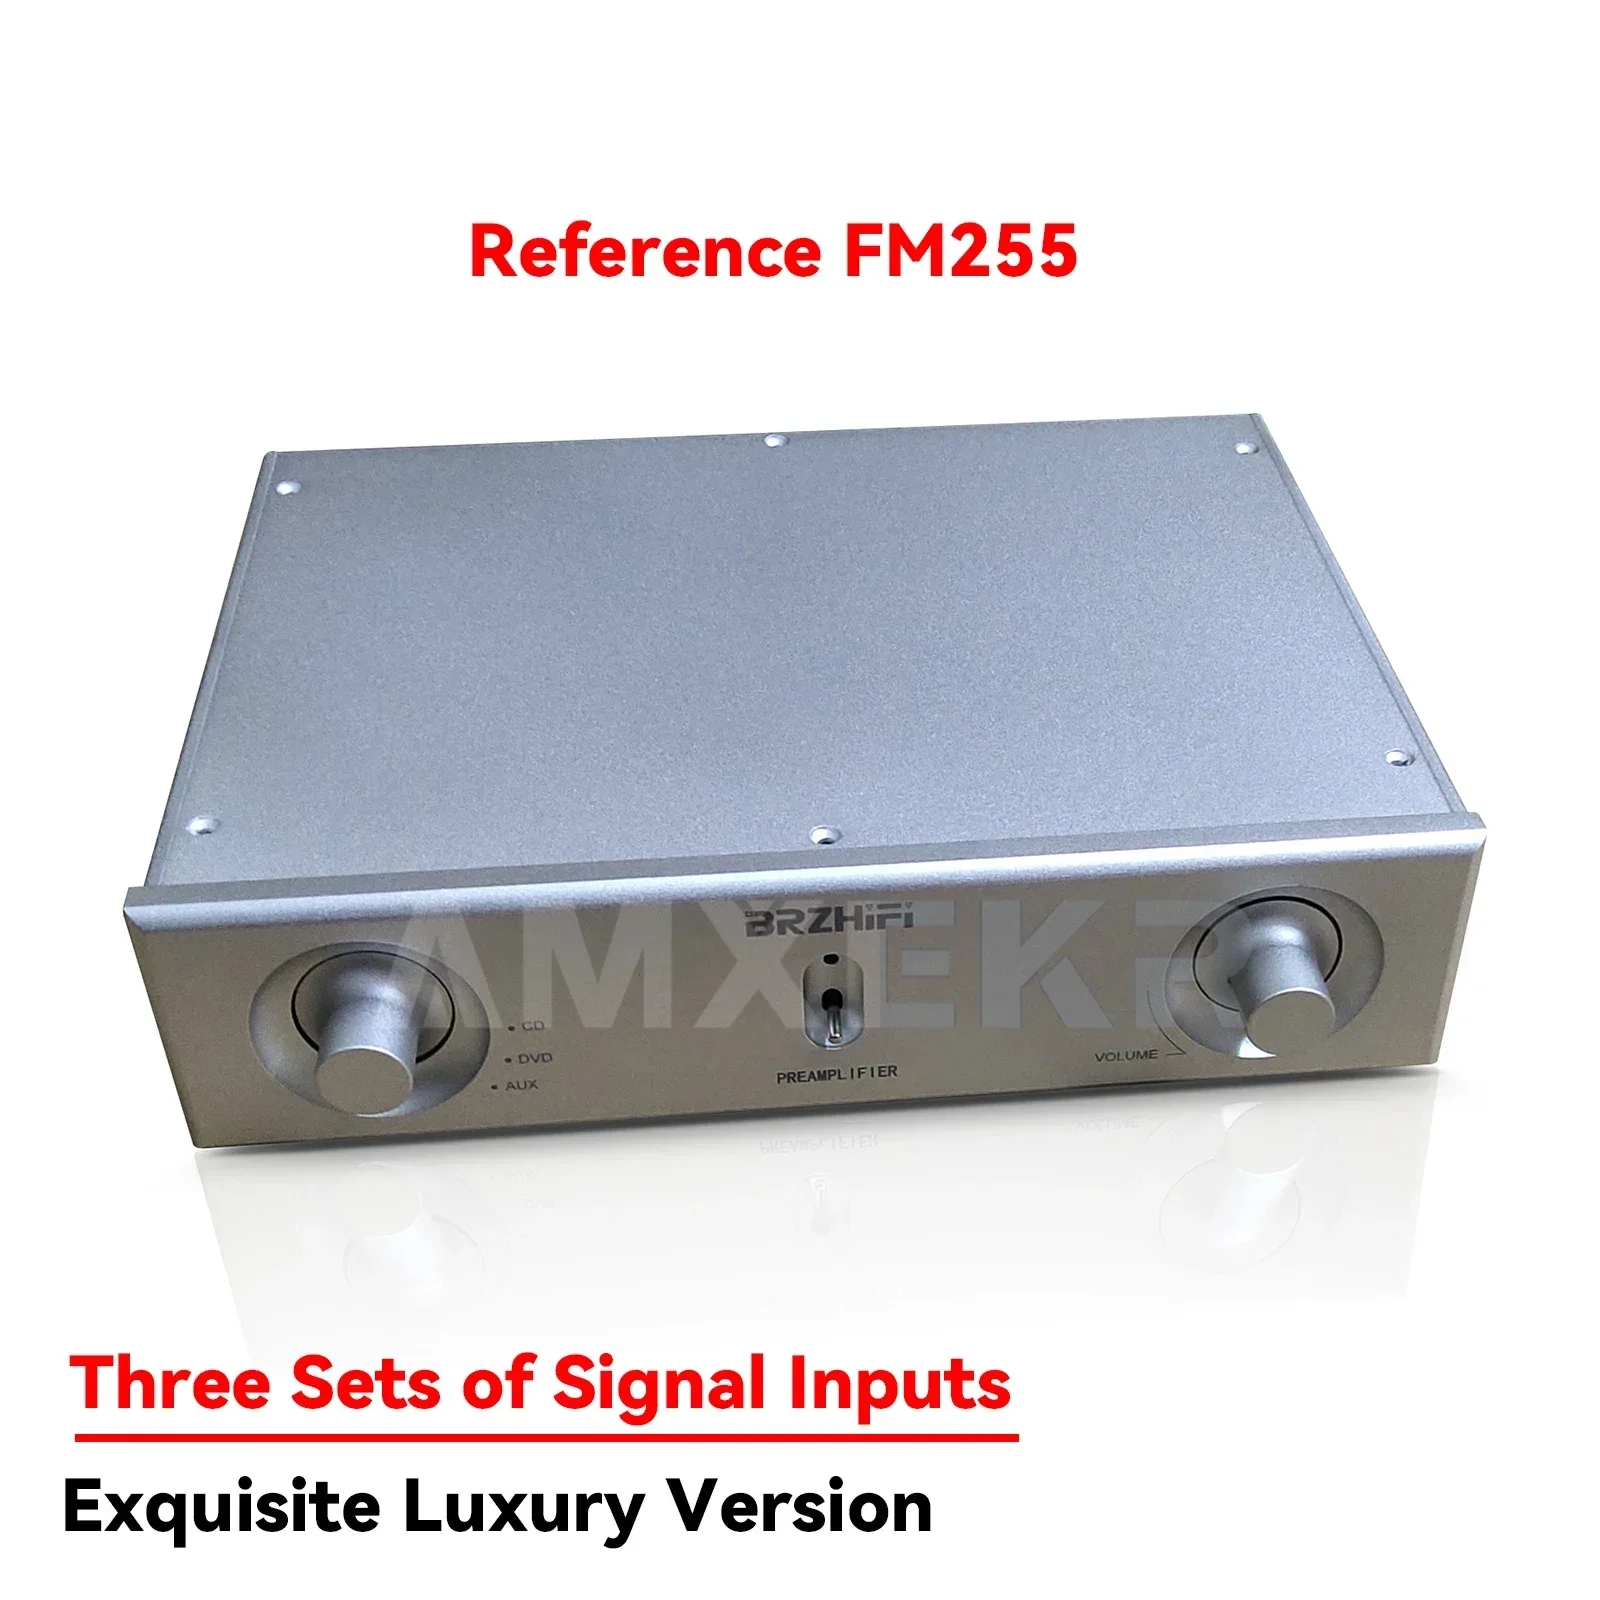 

AMXEKR Finished FM255 Preamplifier HiFi Stereo 3 Way Input 1 Way Output Hi-End Preamp Silver RCA Sophisticated Deluxe Edition